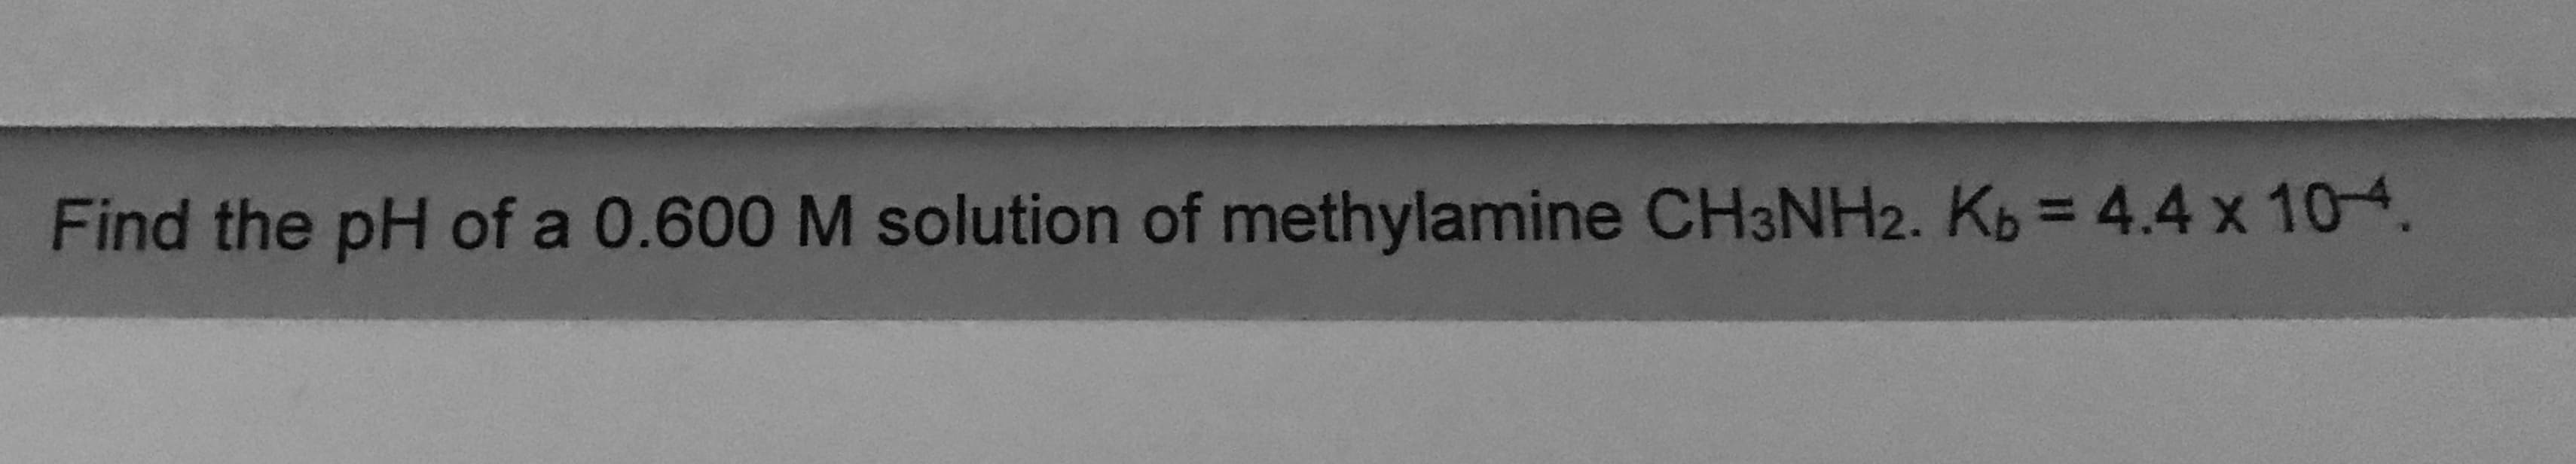 Find the pH of a 0.600 M solution of methylamine CH3NH2. Kb = 4.4 x 10-4.
%3D
